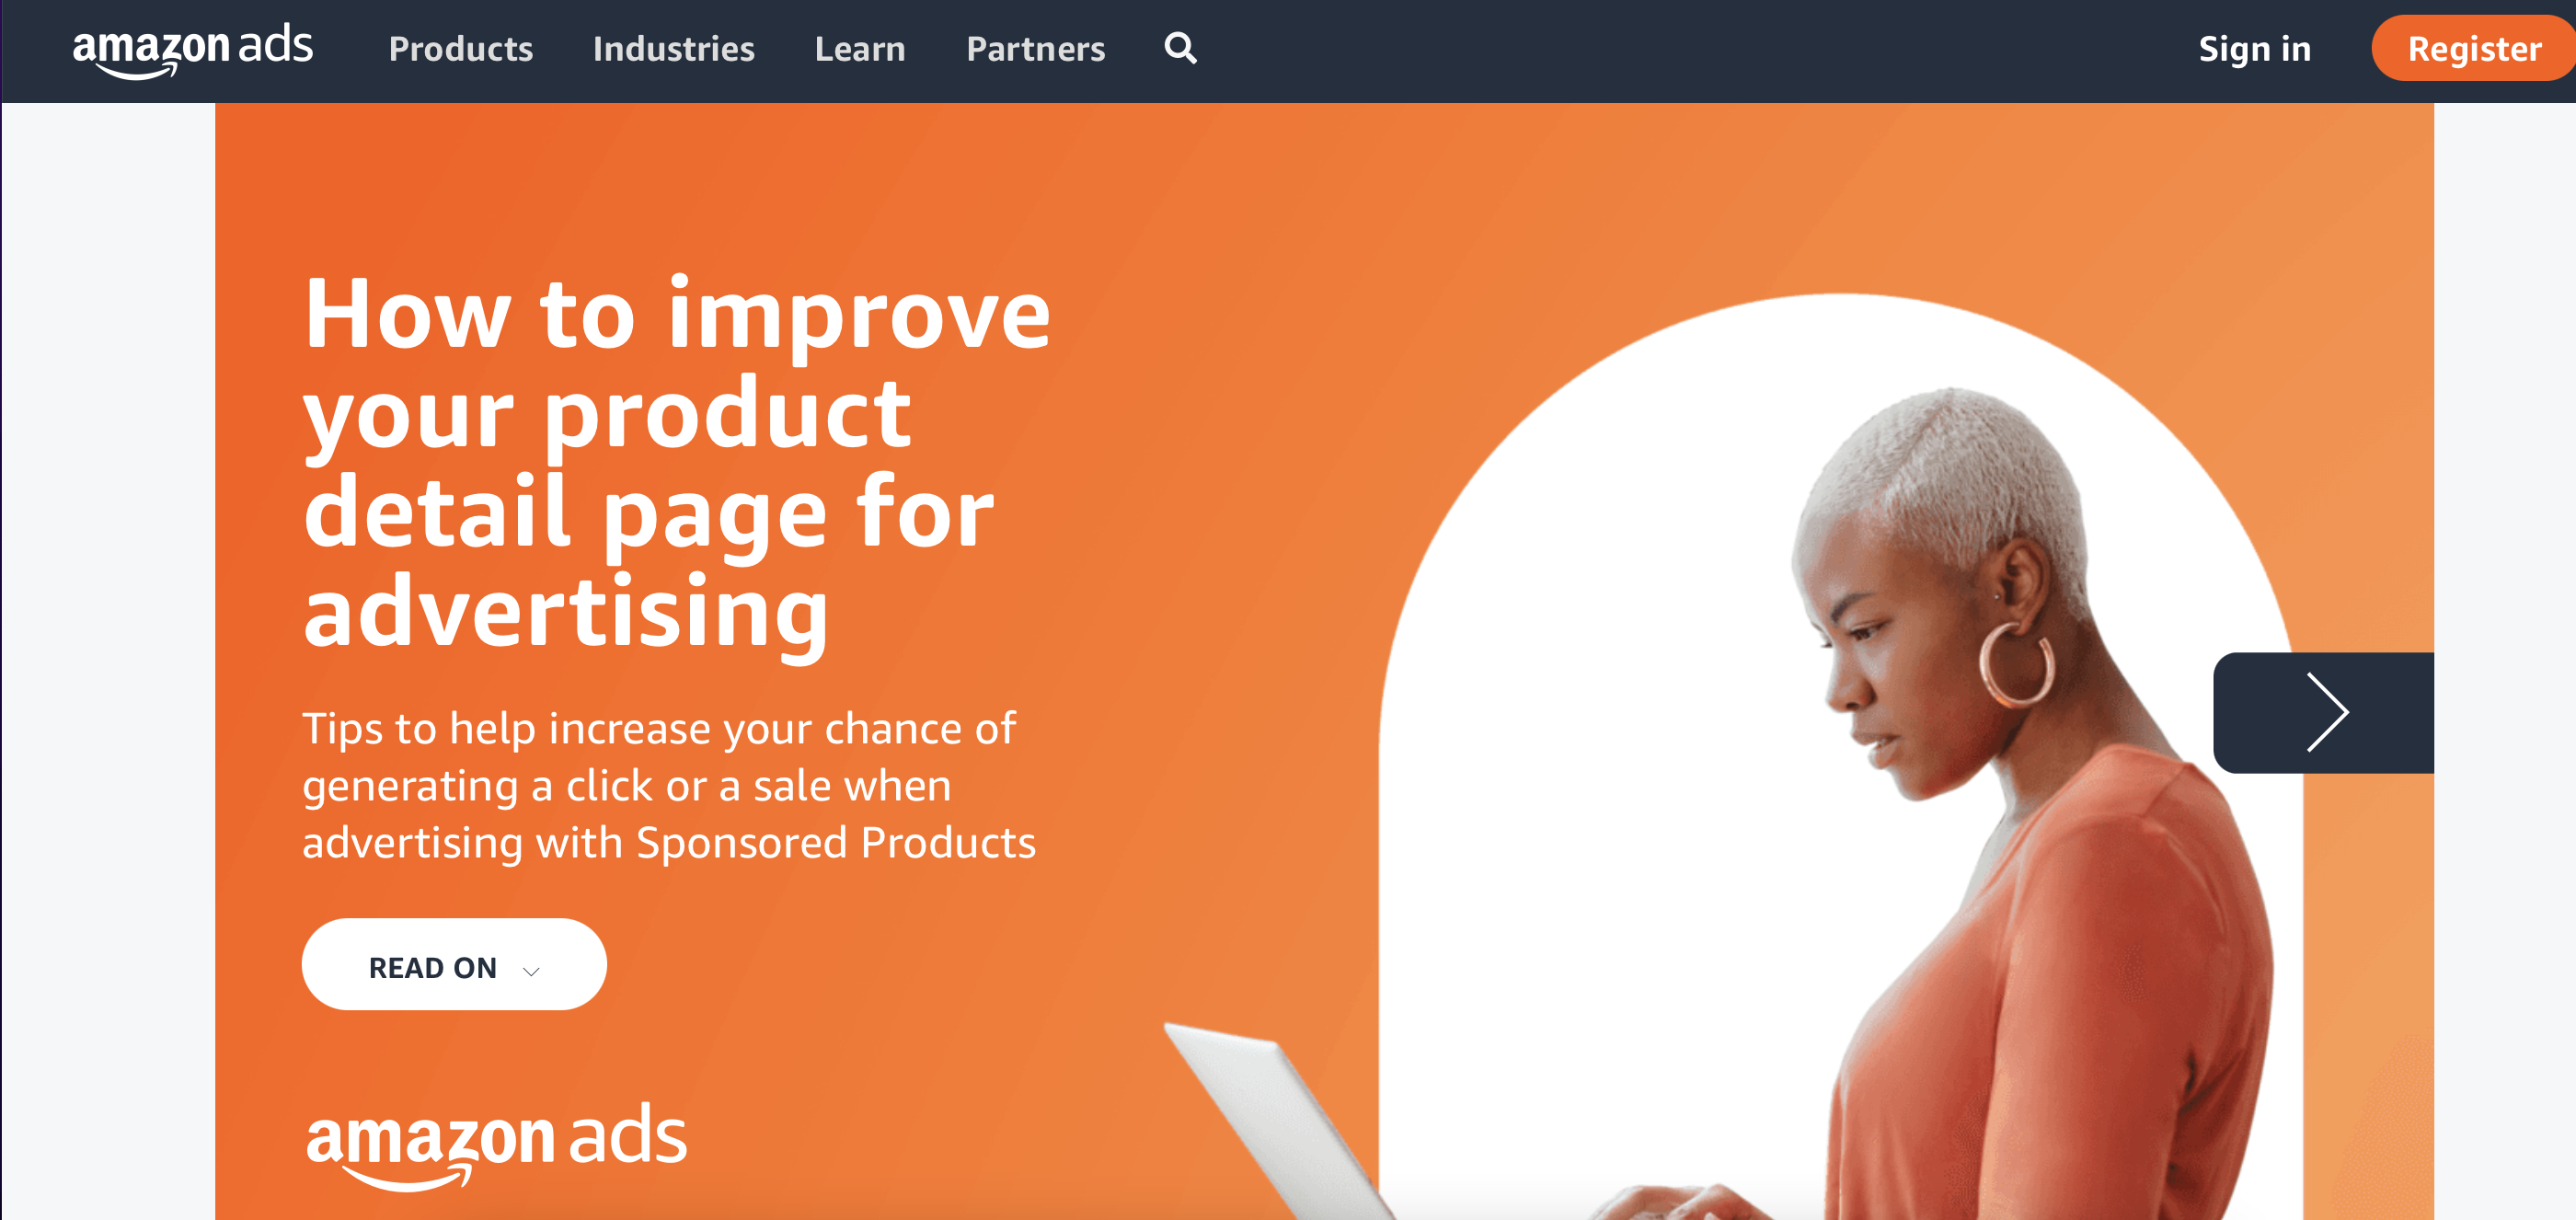 Steps to improve Amazon listing for Sponsored Products ads